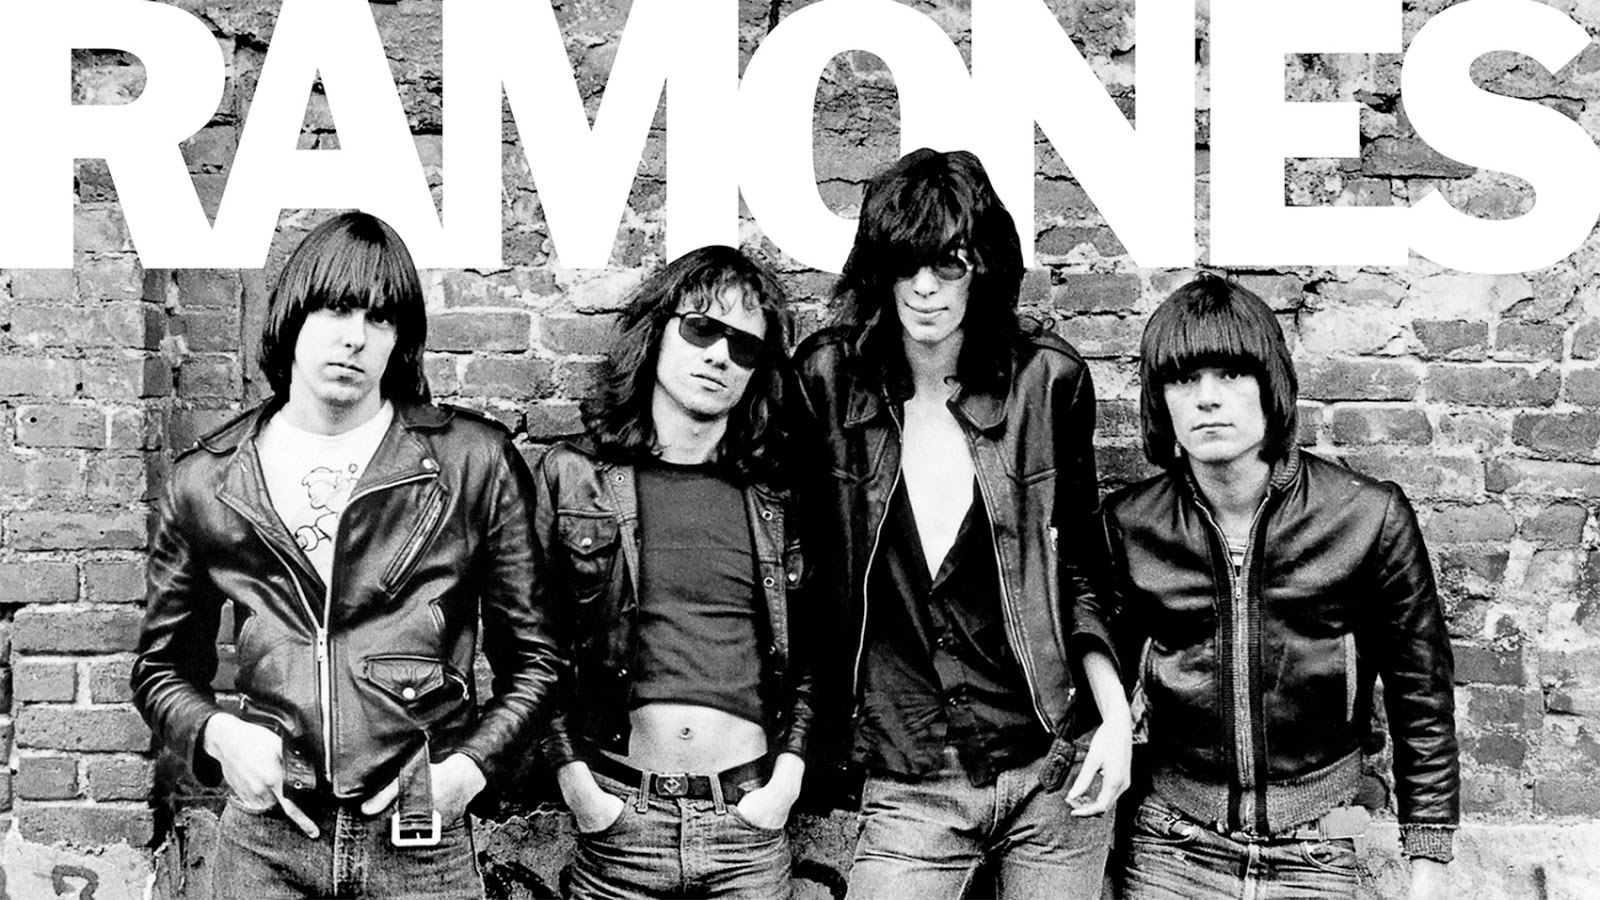 Music In Review: The Ramones - Blitzkrieg Bop